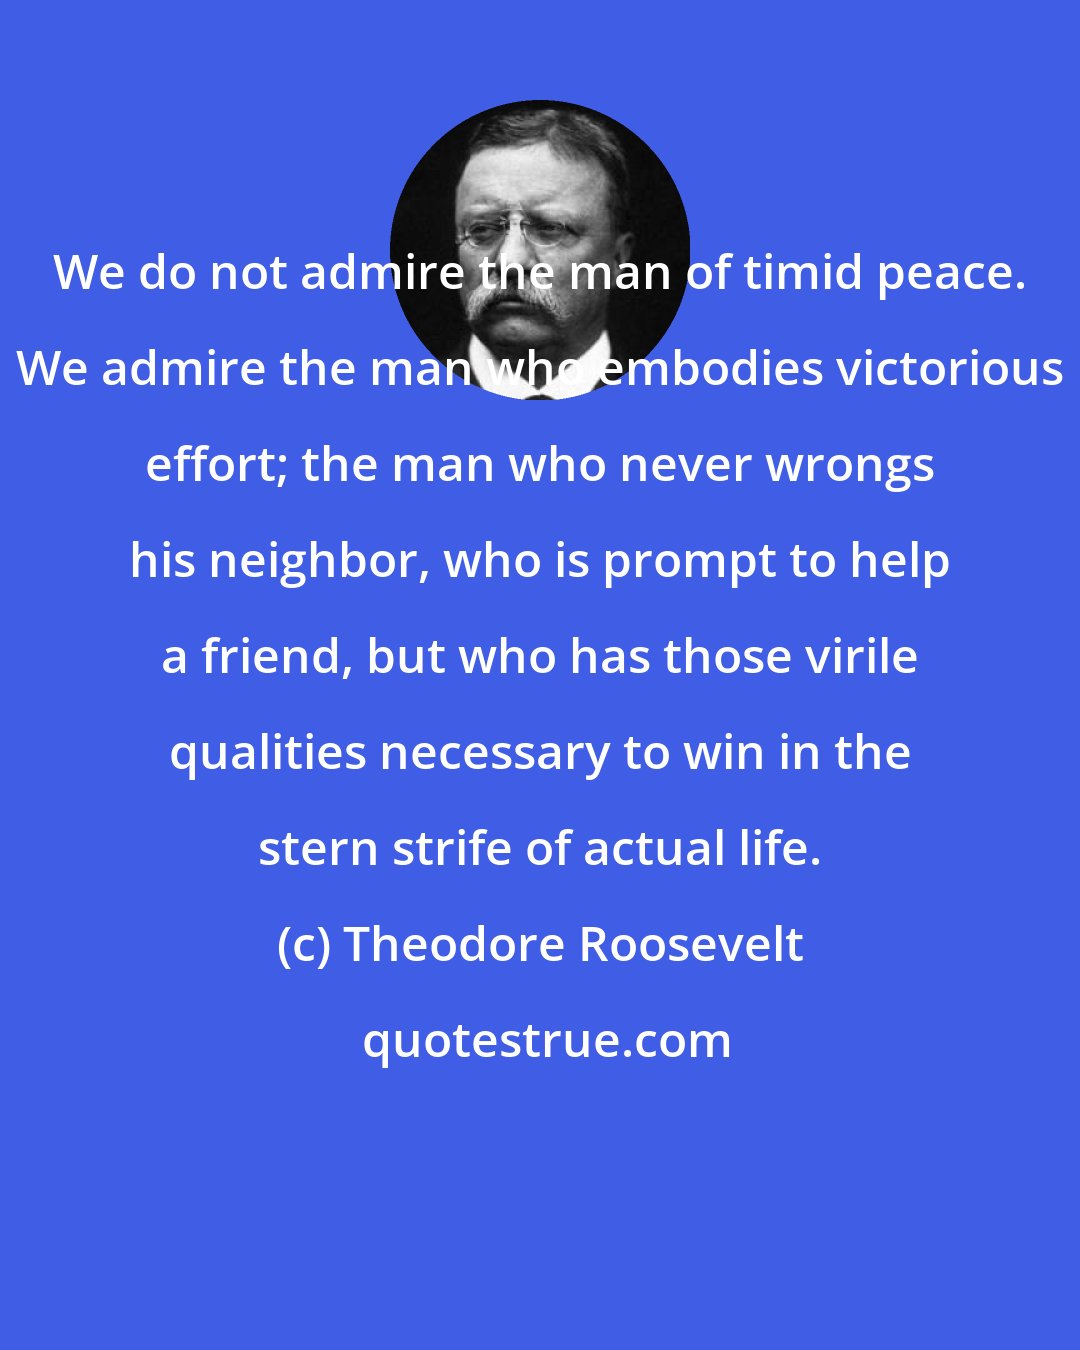 Theodore Roosevelt: We do not admire the man of timid peace. We admire the man who embodies victorious effort; the man who never wrongs his neighbor, who is prompt to help a friend, but who has those virile qualities necessary to win in the stern strife of actual life.